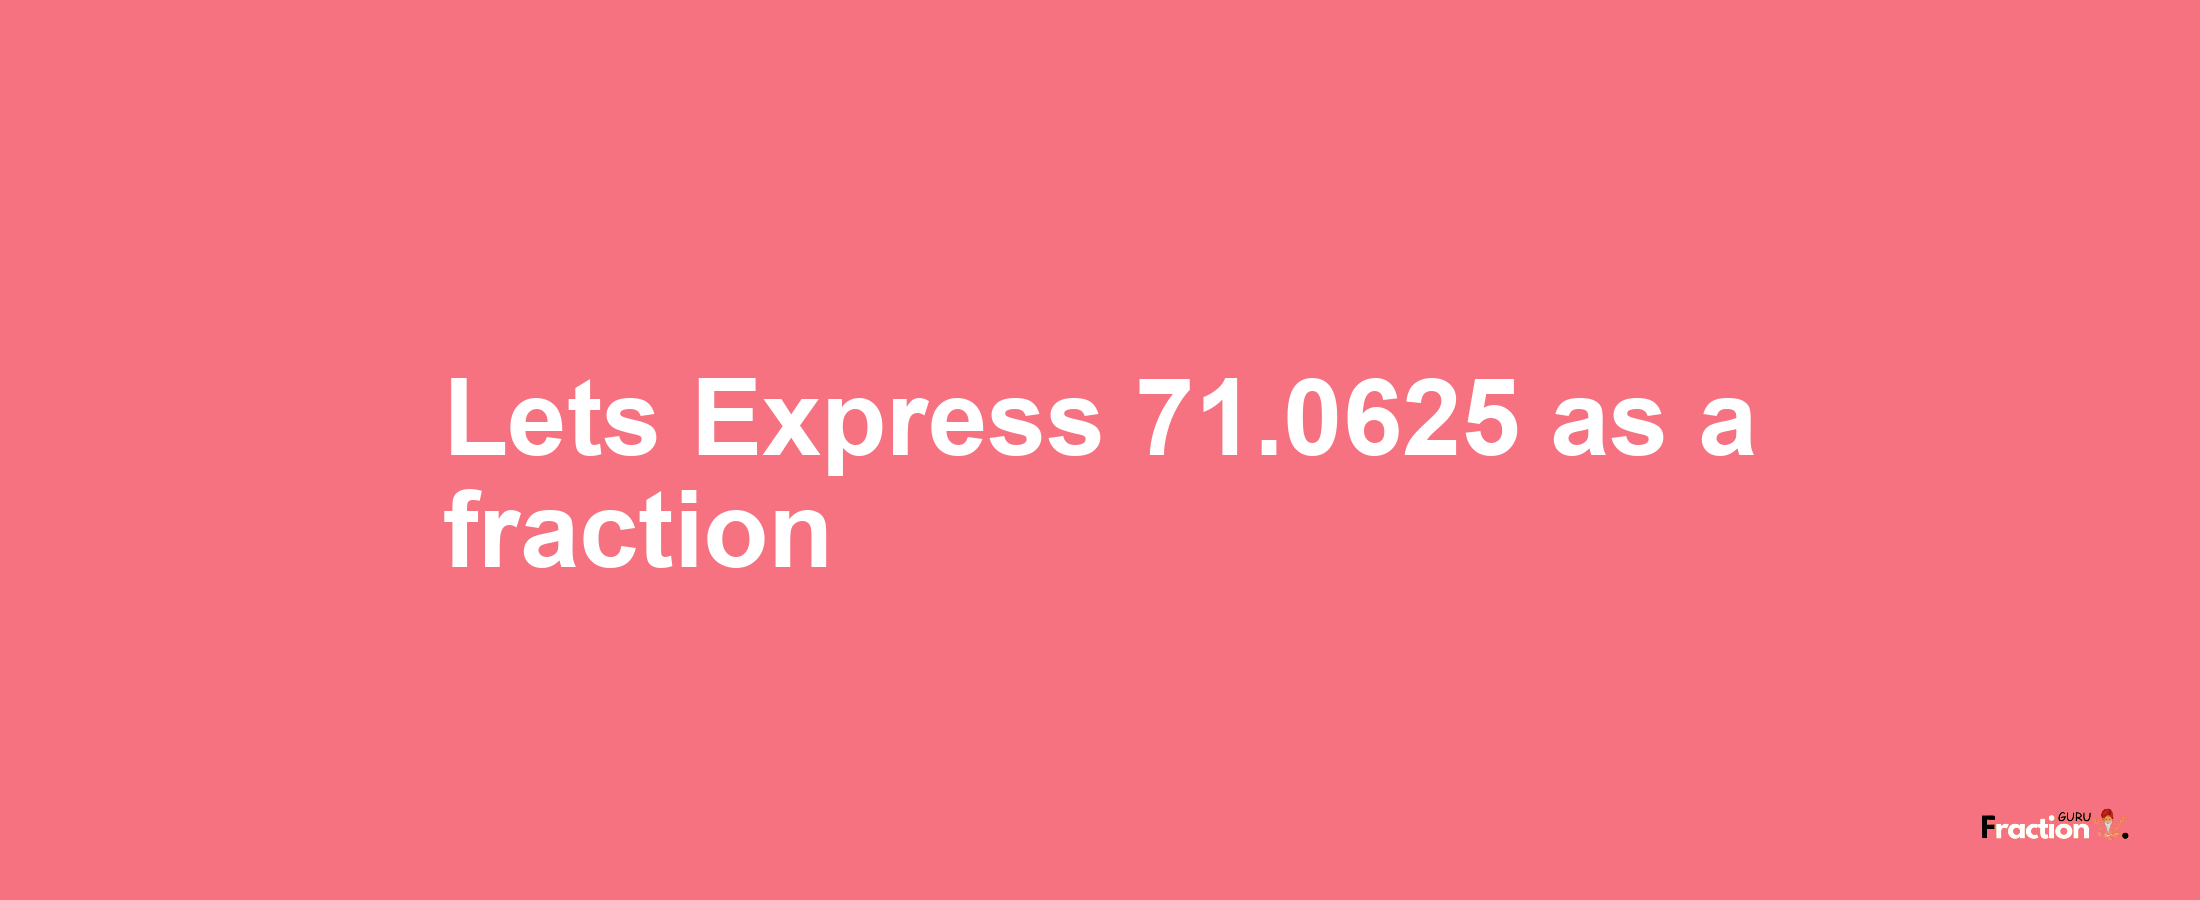 Lets Express 71.0625 as afraction